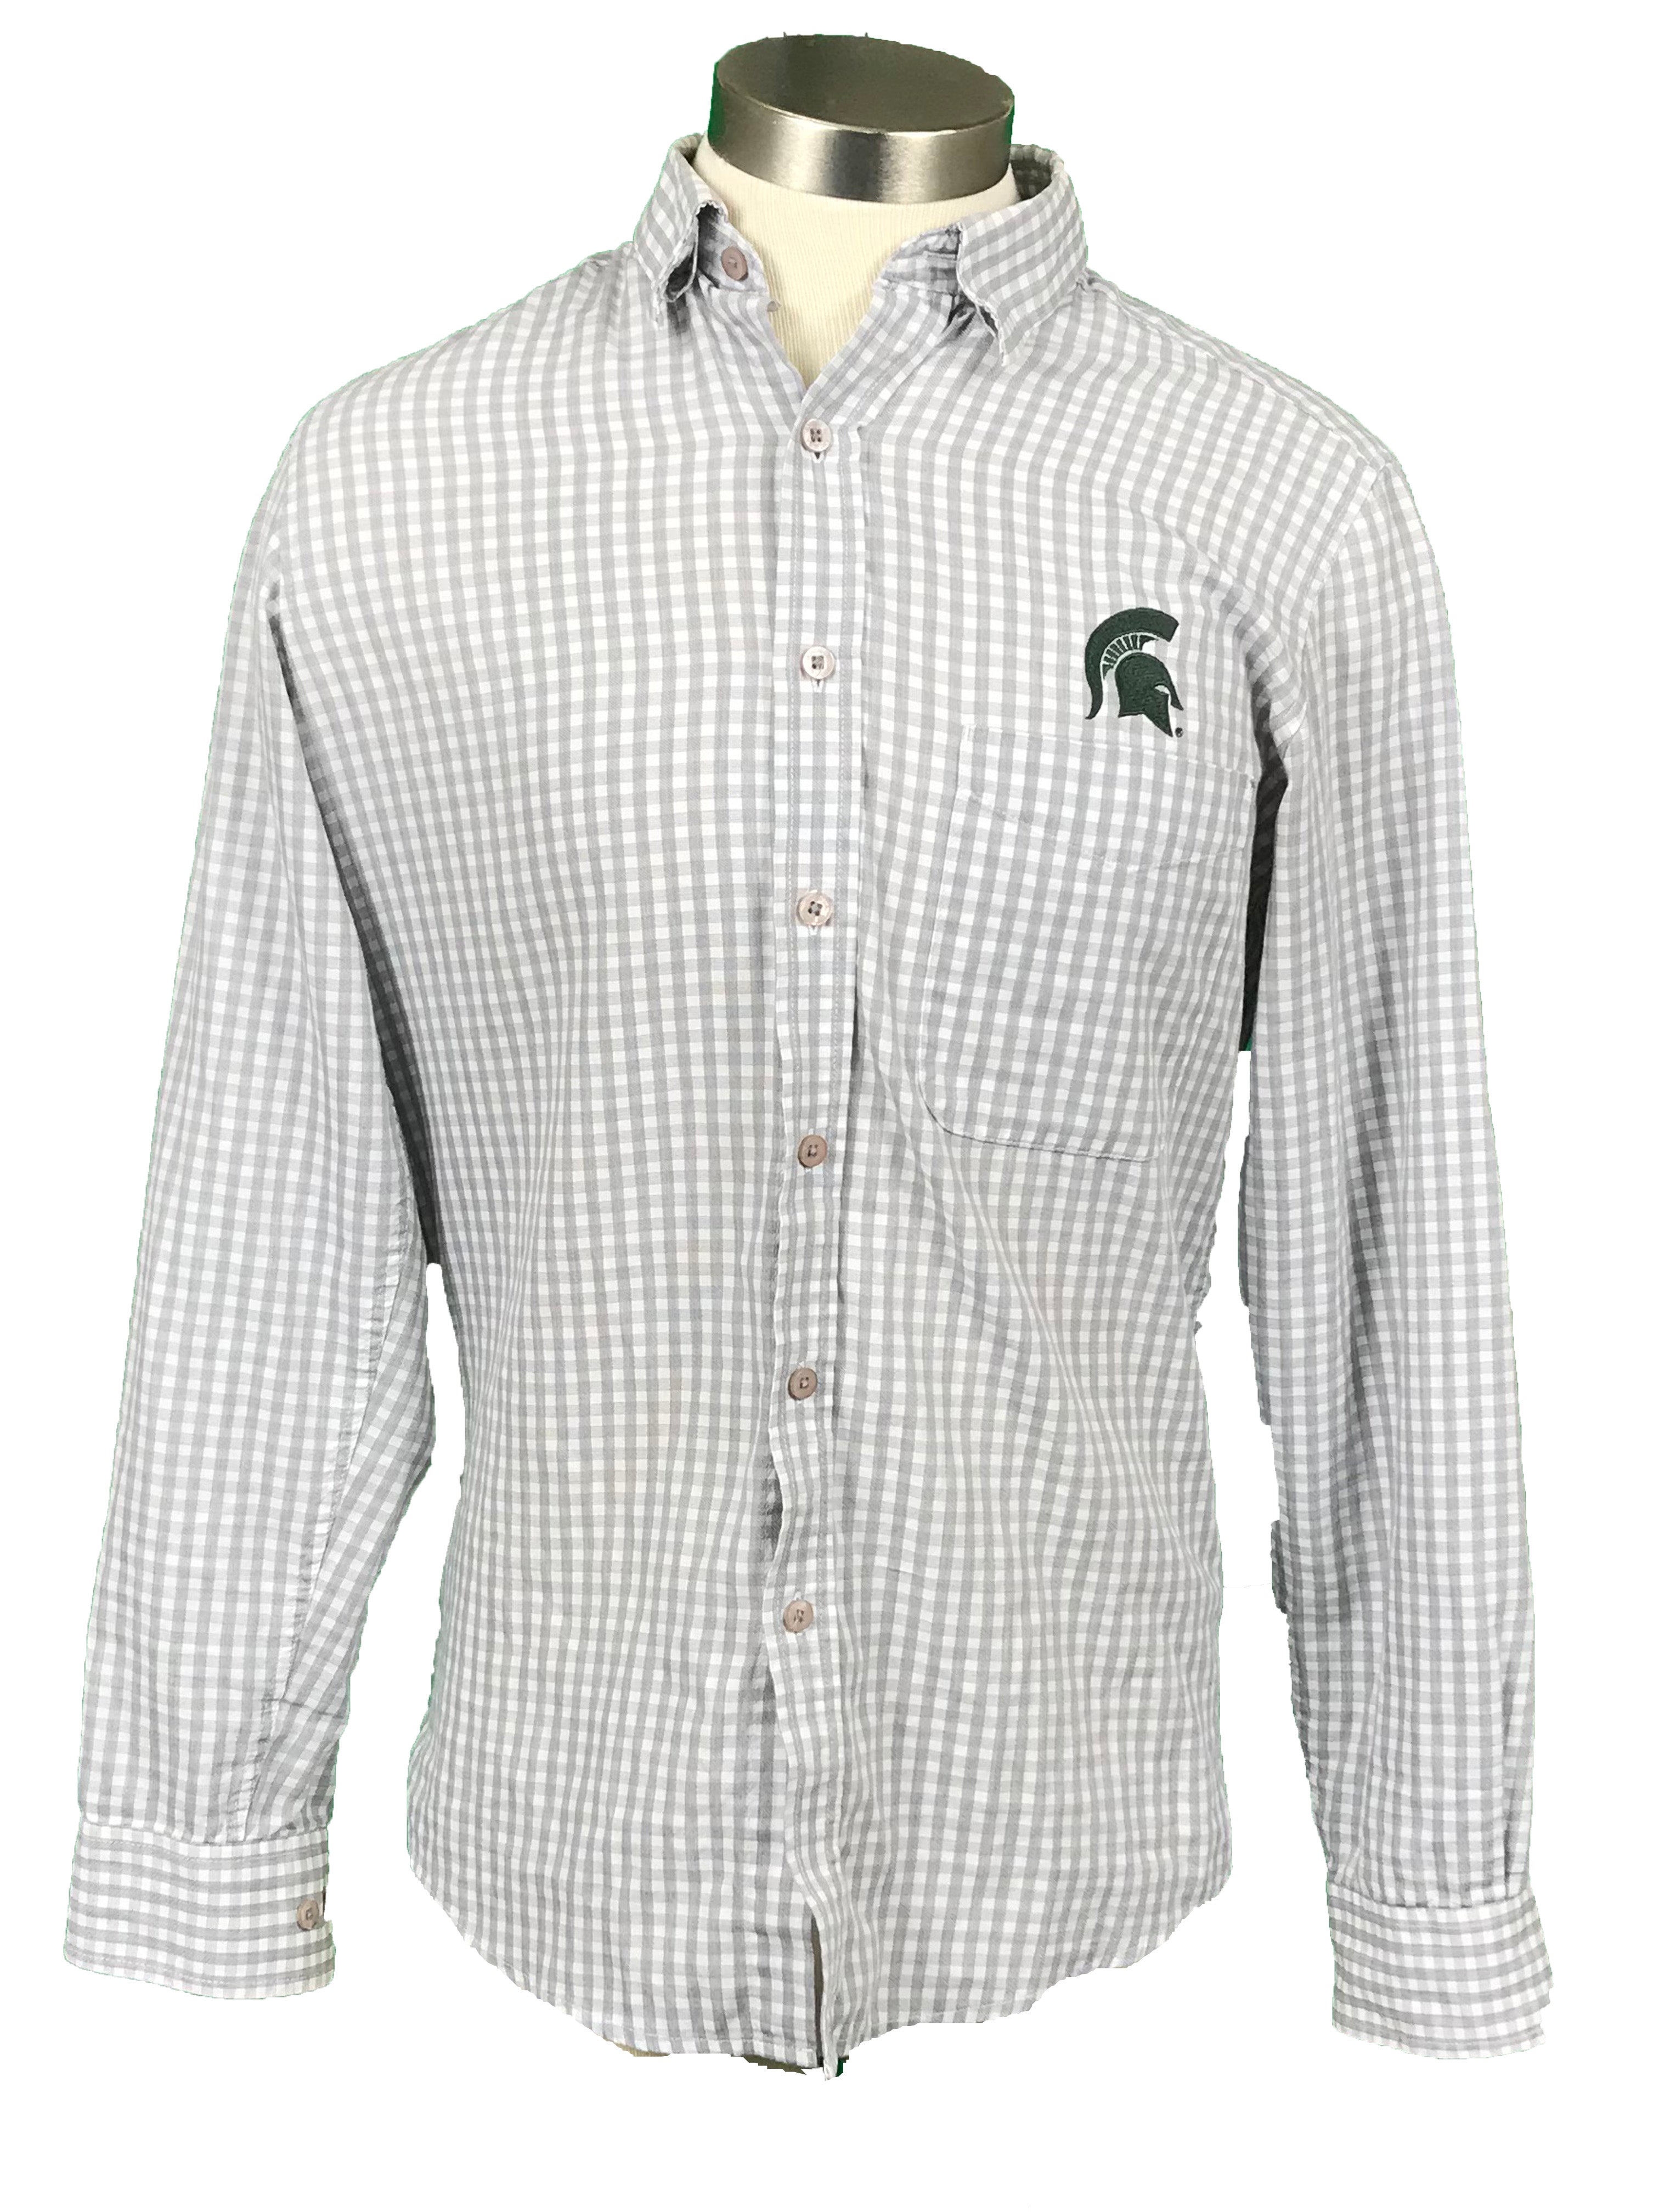 Antigua Gray and White Plaid Long Sleeve Button Down Men's S